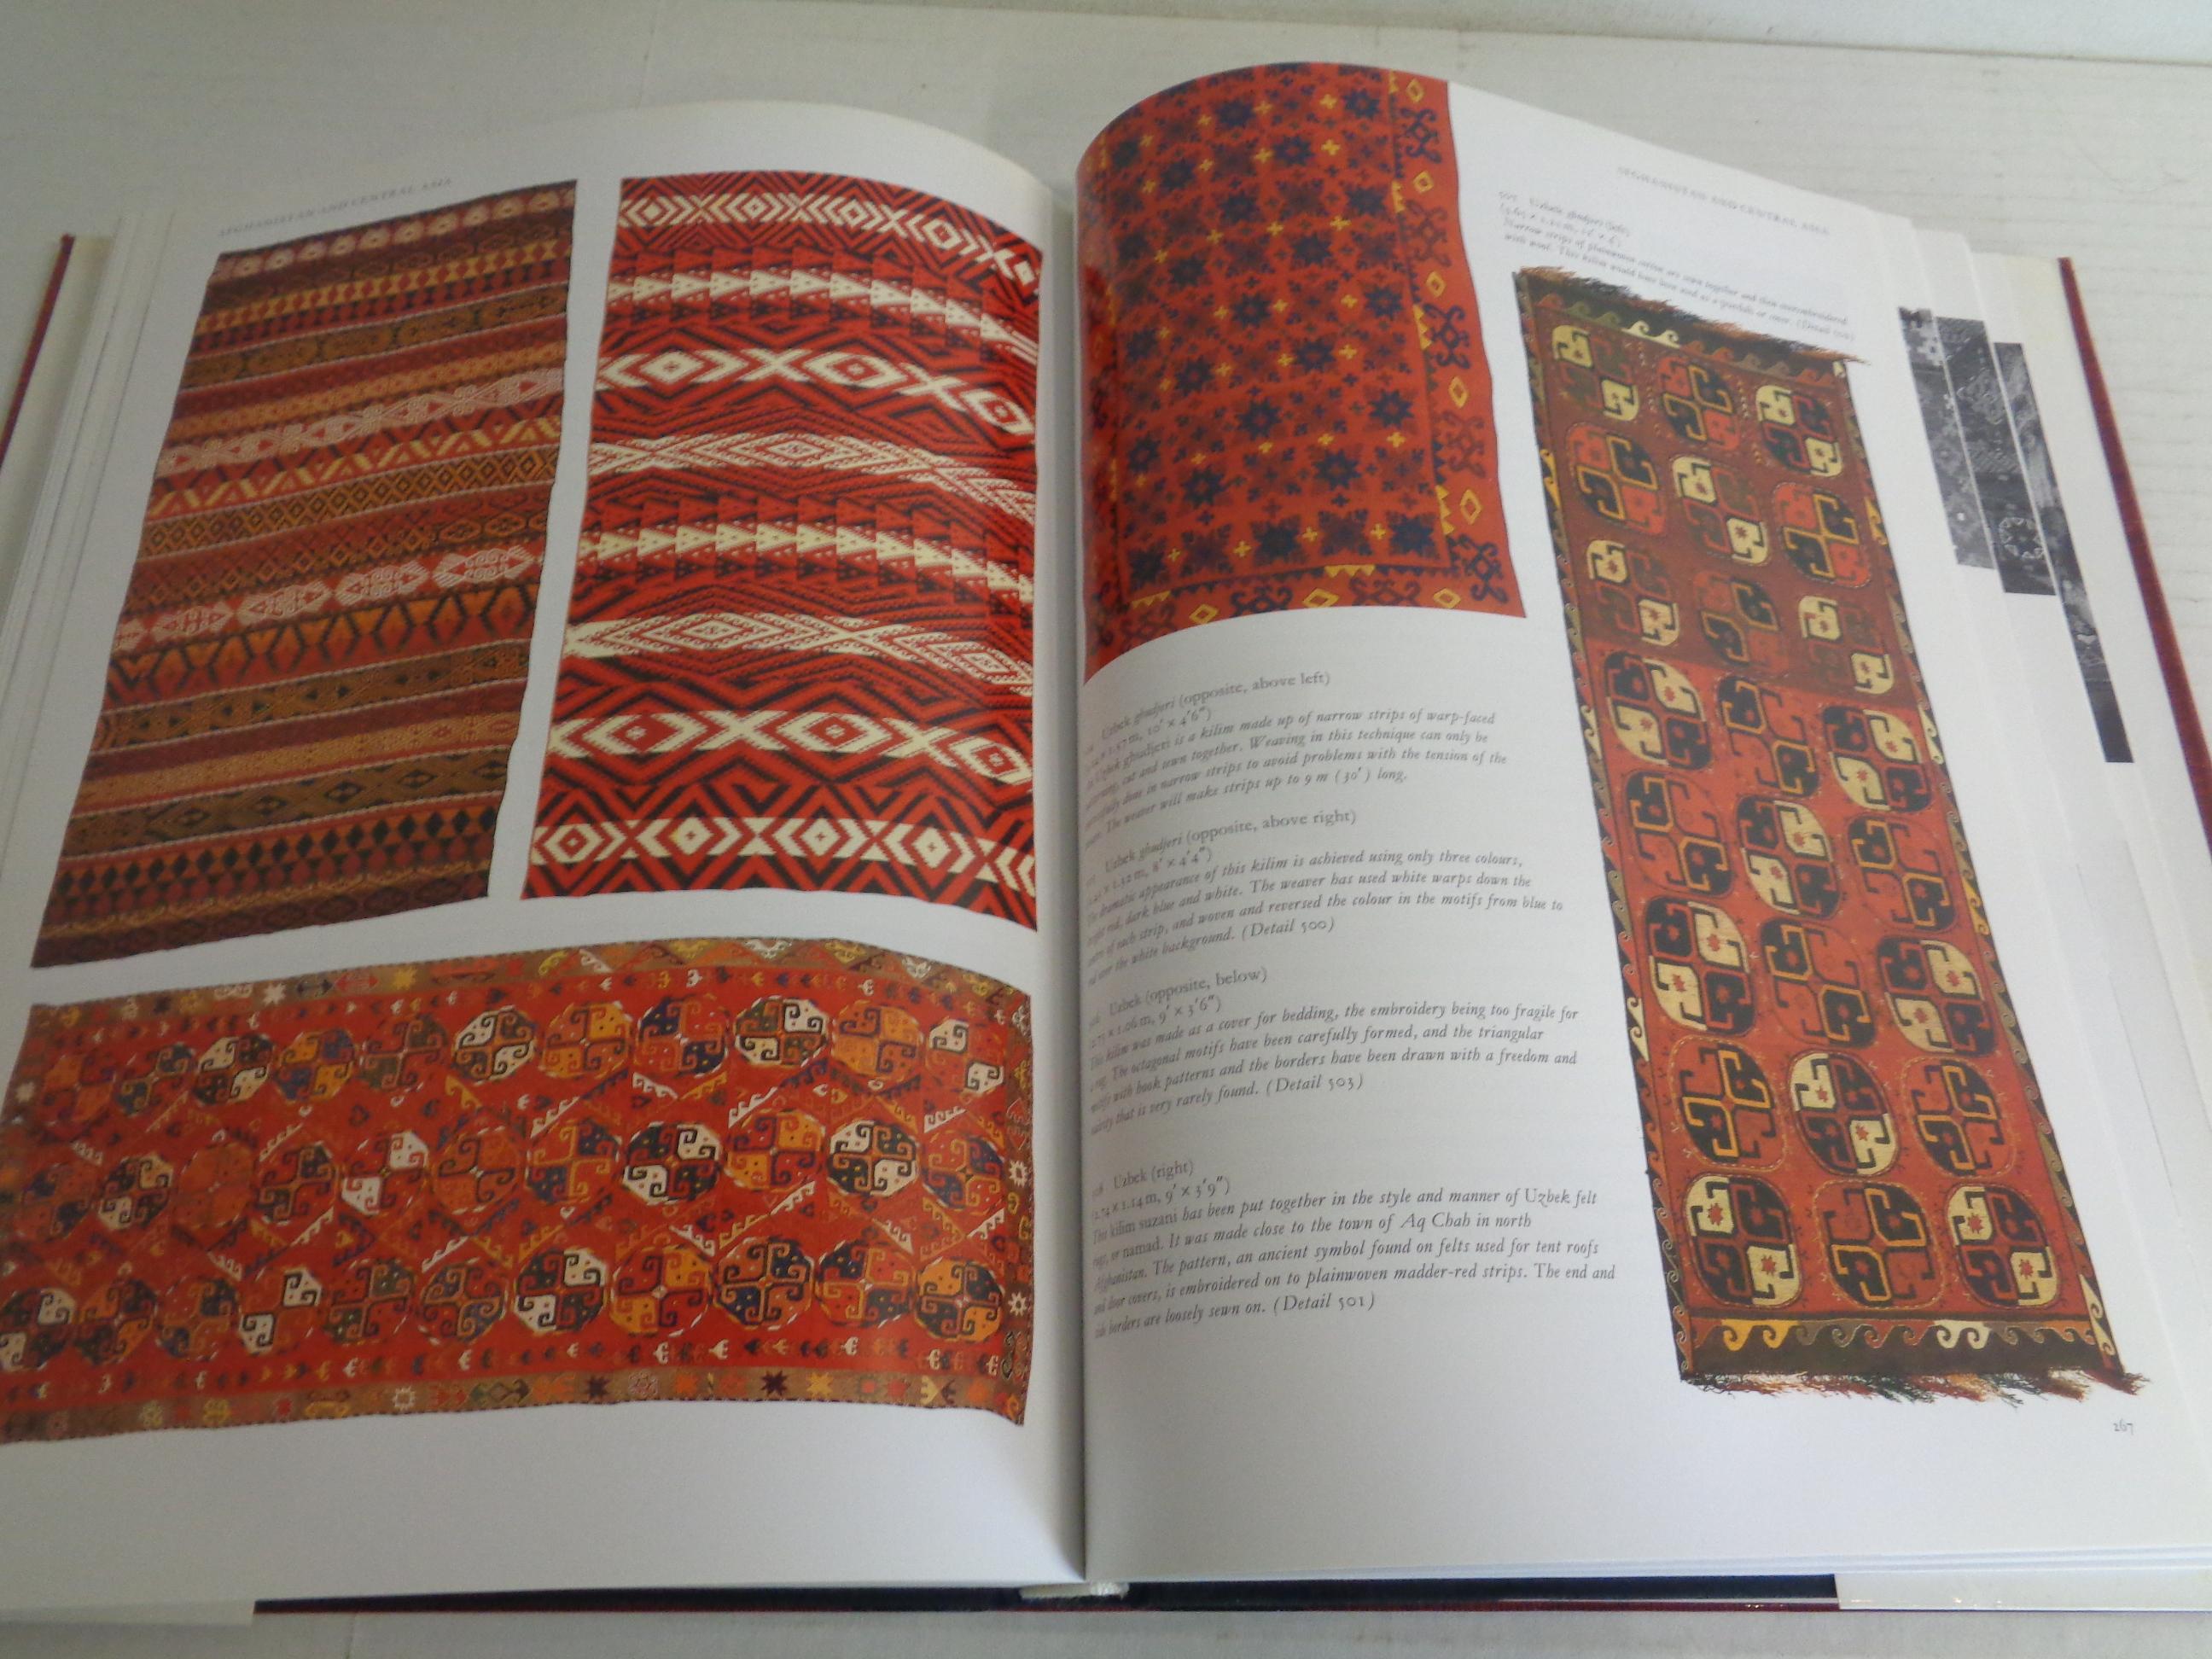 KILIM: The Complete Guide - 1993 Chronicle Books - 1st Edition For Sale 8